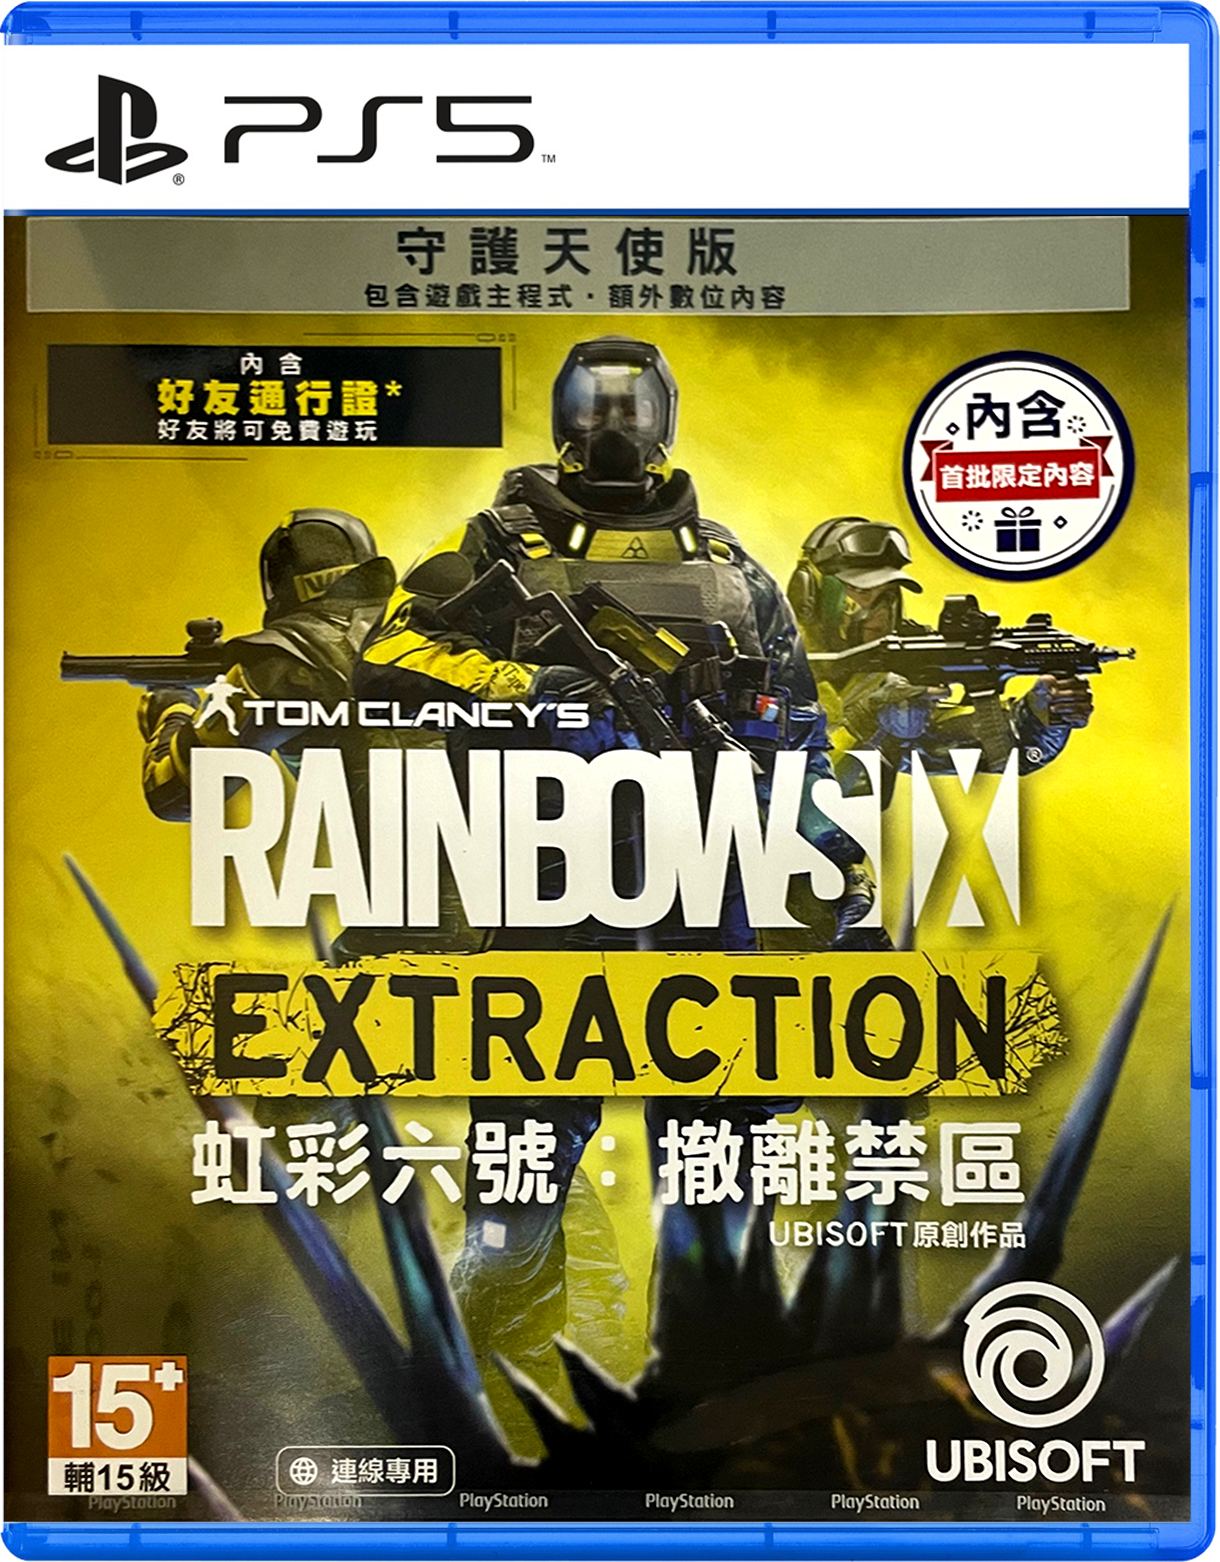 5 (English) Edition] Six Clancy\'s [Guardian PlayStation Rainbow Tom for Extraction